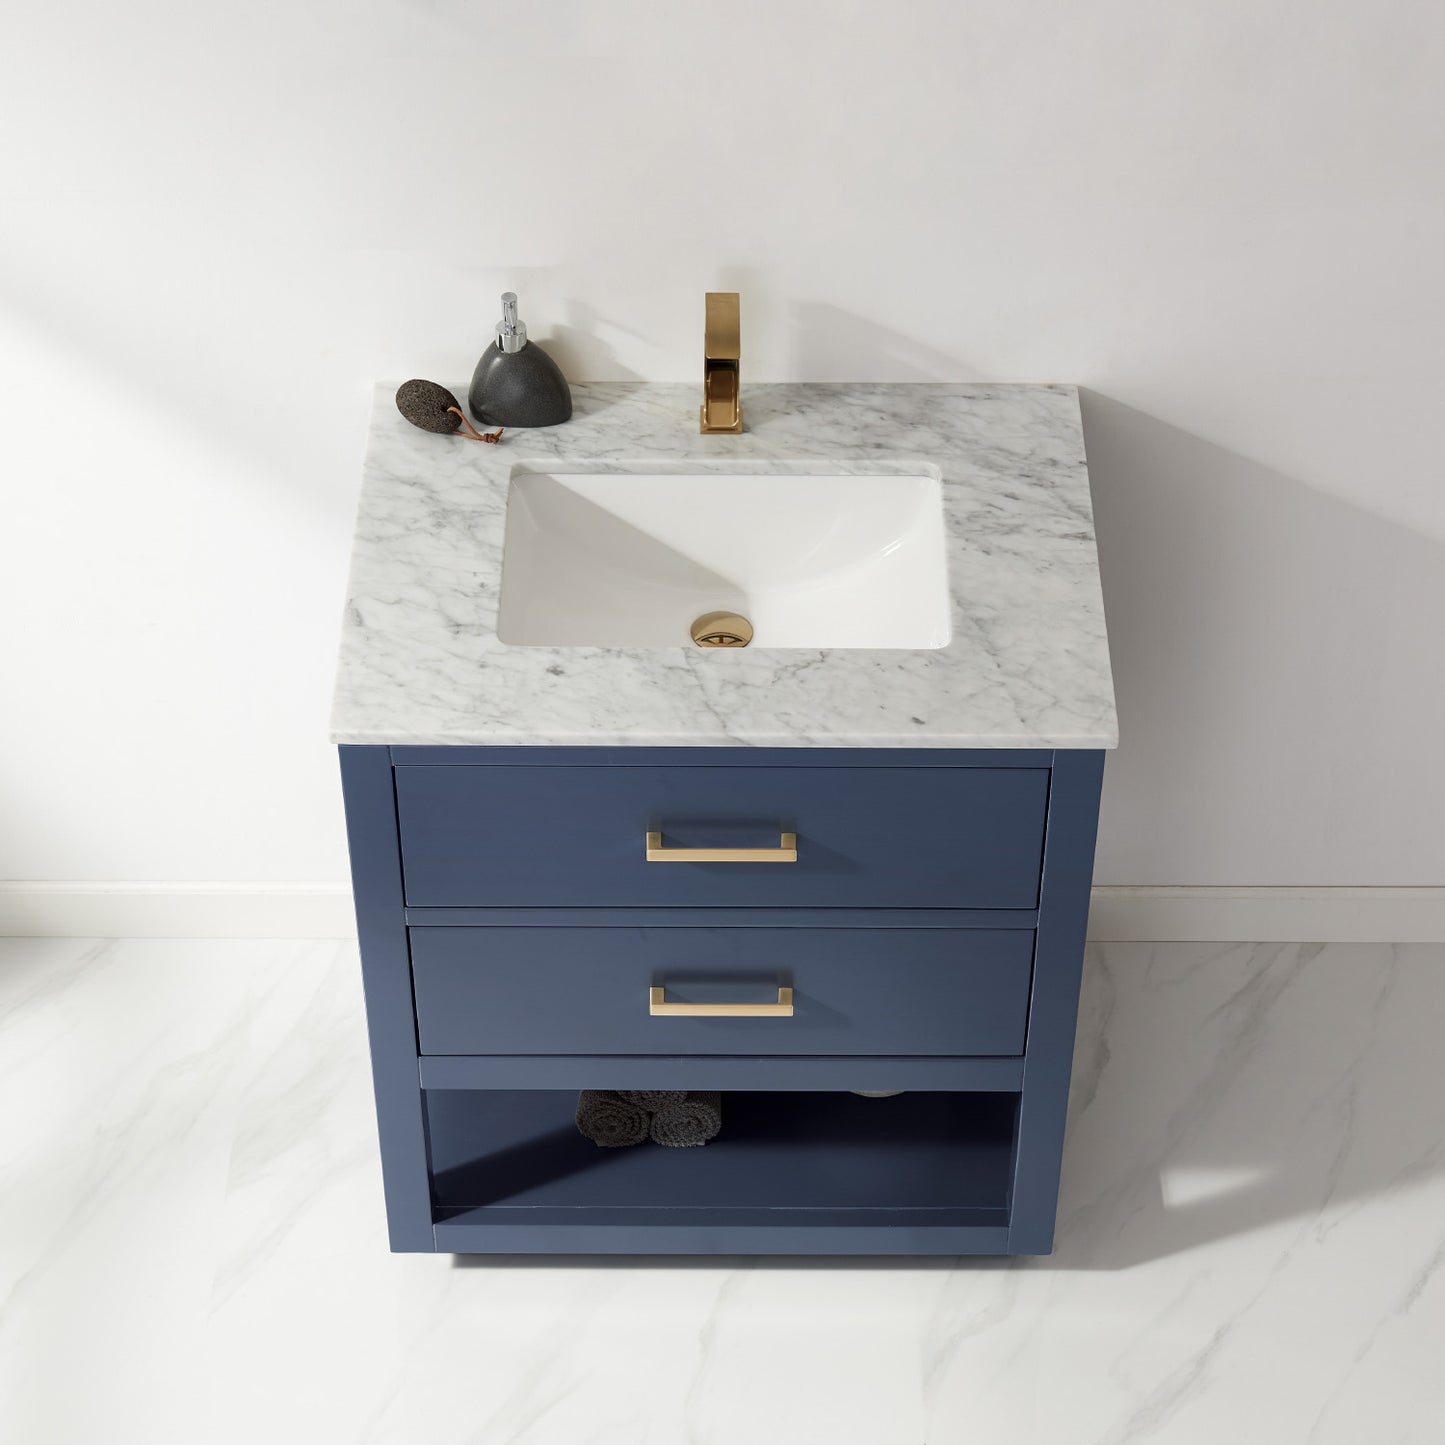 Remi Single Bathroom Vanity Set in Gray and Carrara White Marble Countertop with Mirror